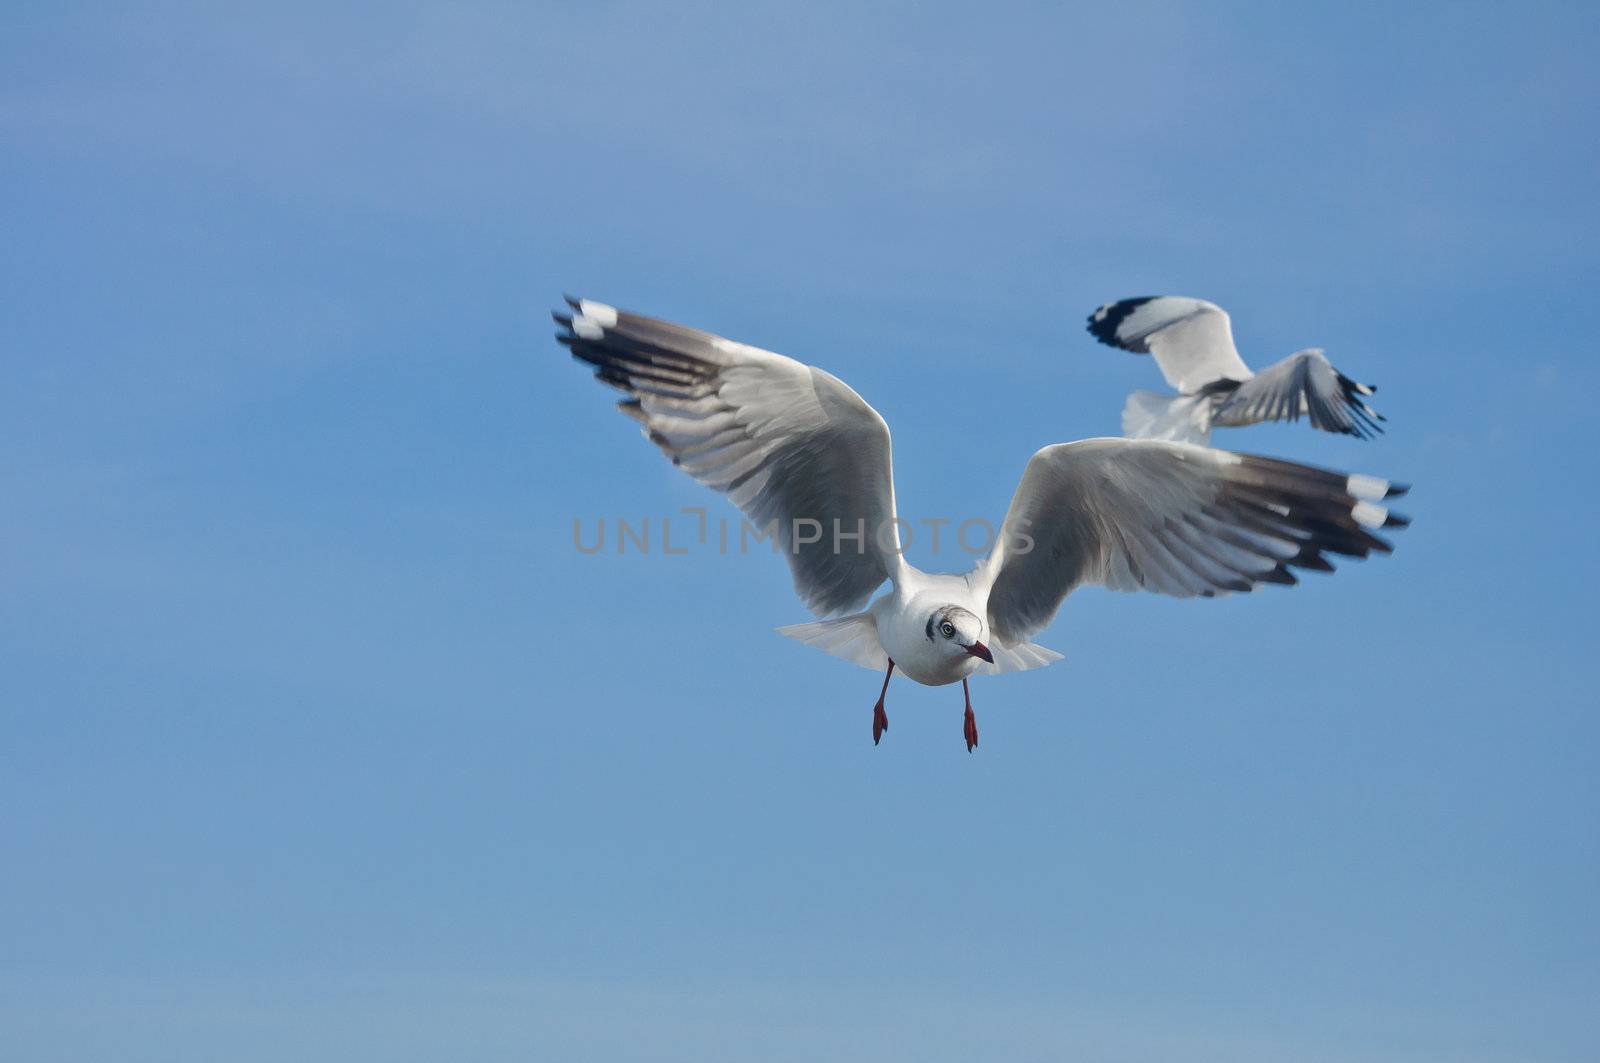 The seagull flying in the blue sky at Bang Pu beach.